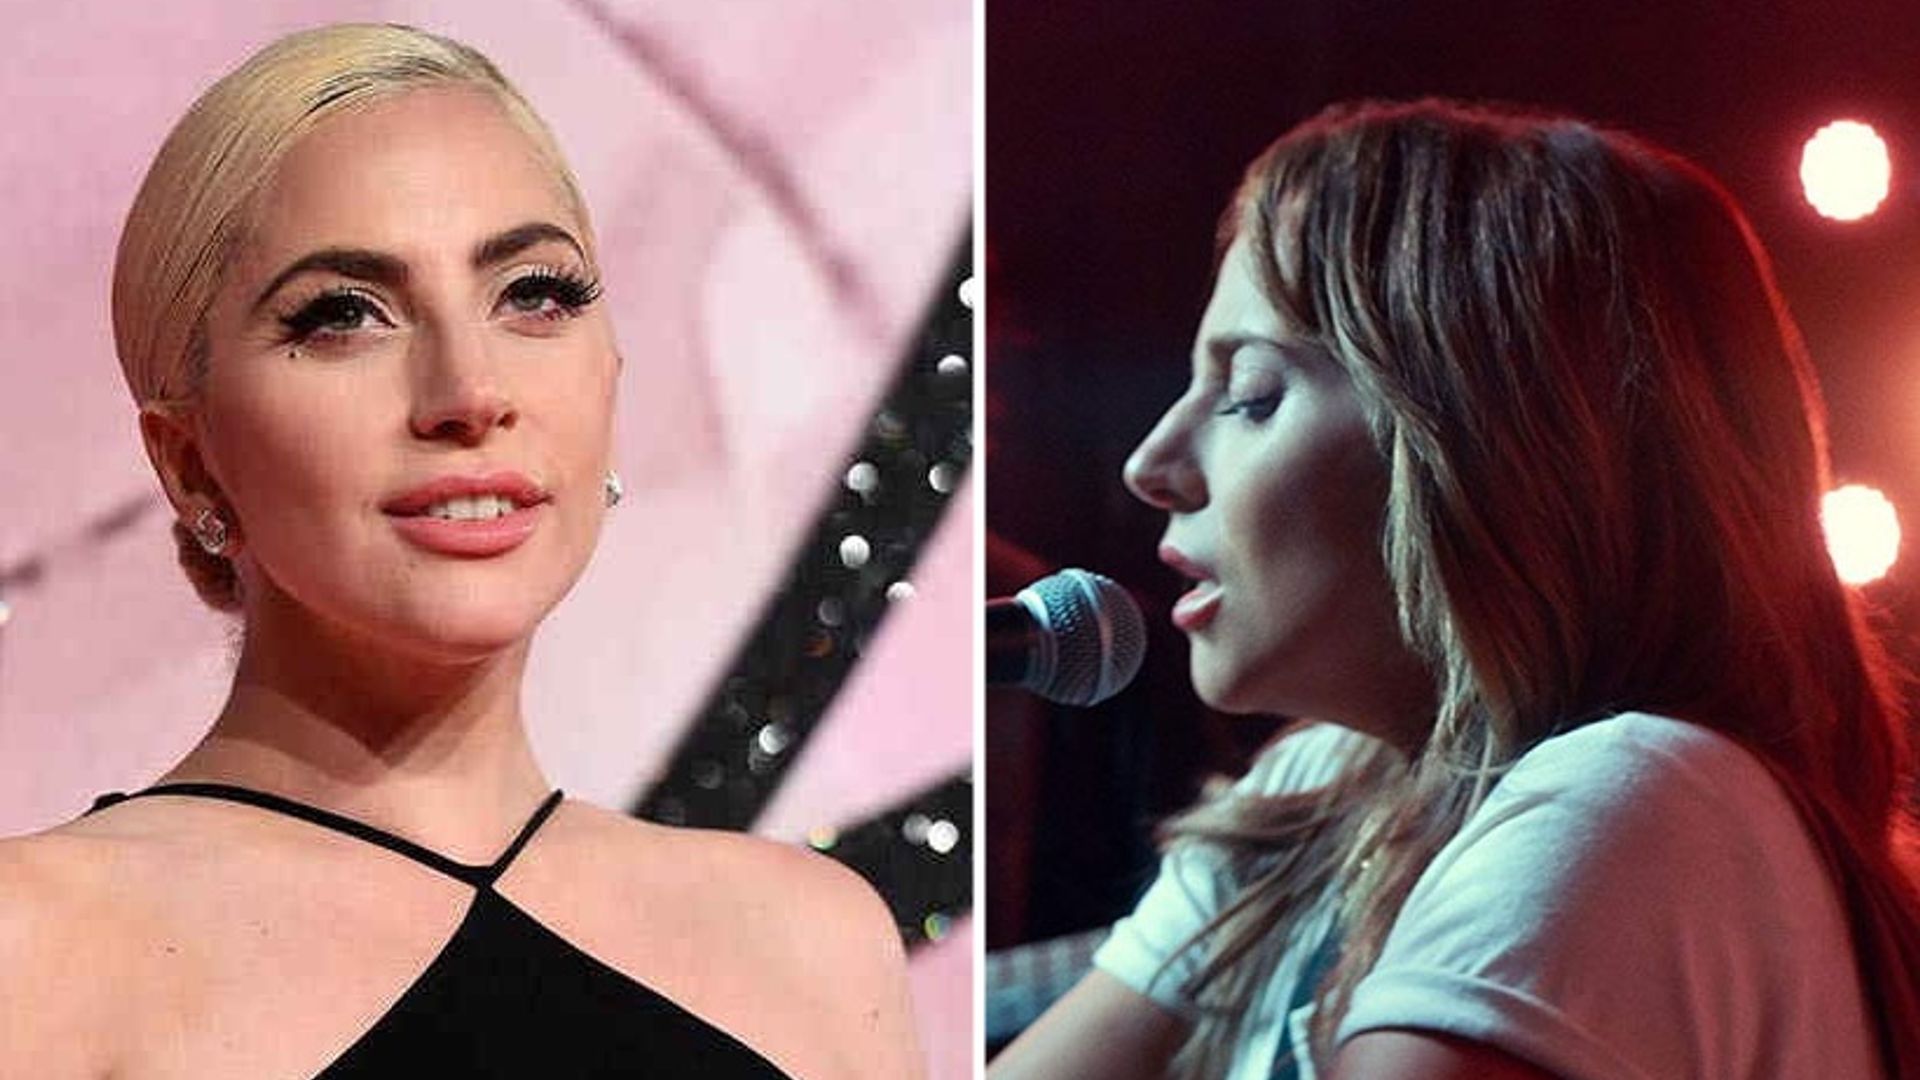 Lady Gaga's makeup artist reveals the incredible process behind her natural A Star Is Born look - and you might be surprised